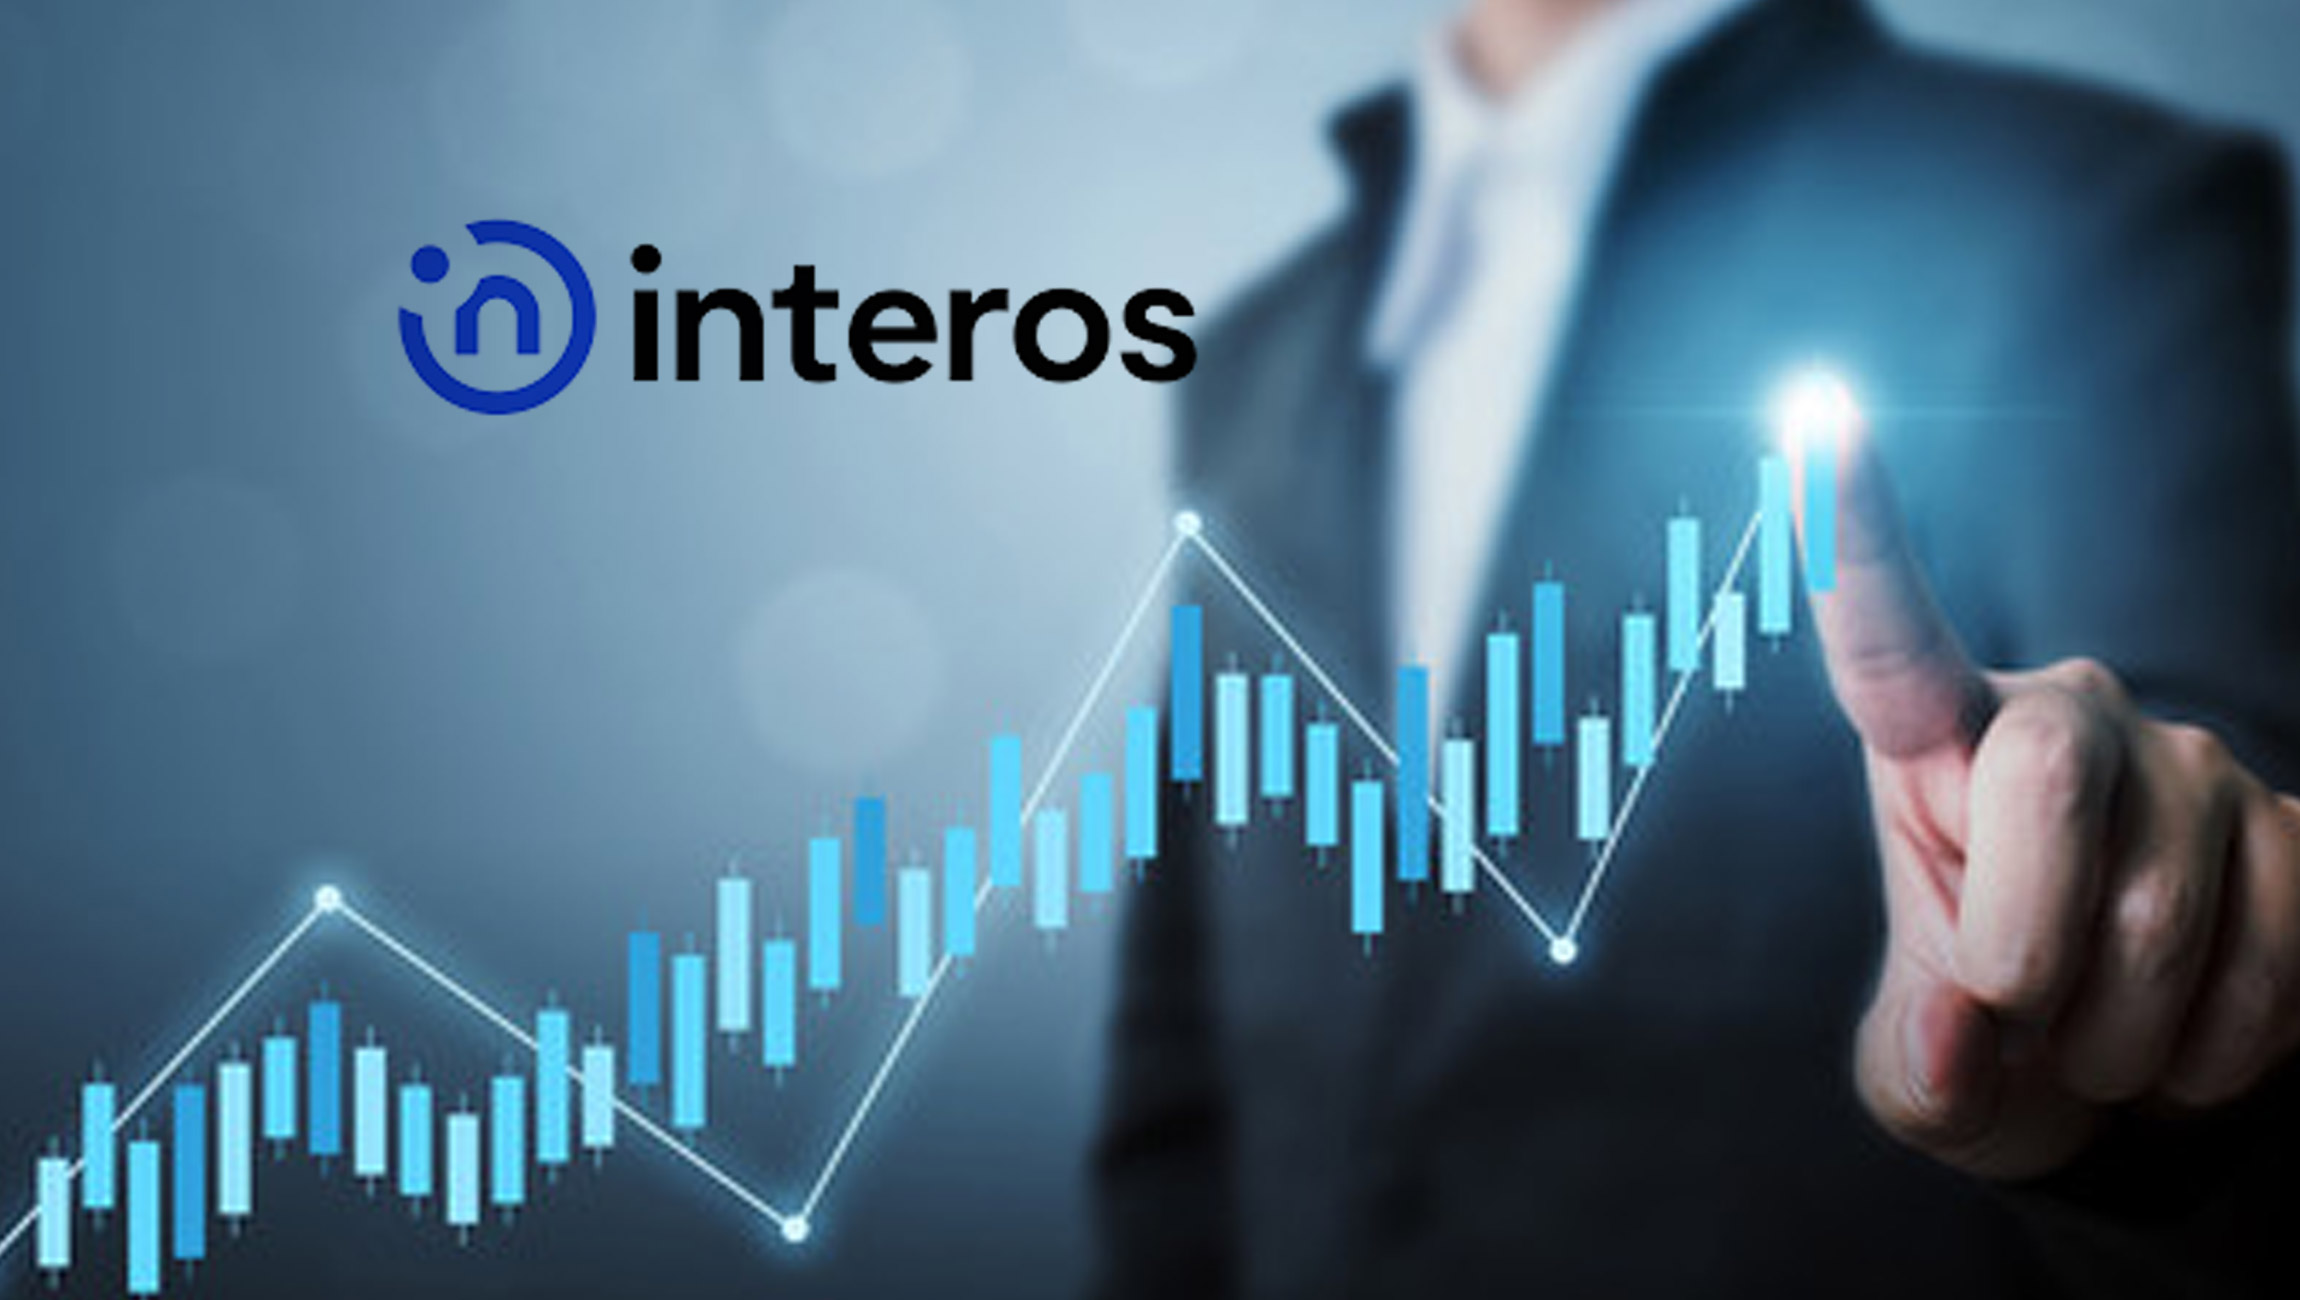 Interos-Growth-Surges-on-Strength-of-New-Product-Innovation_-Investors-and-Partners